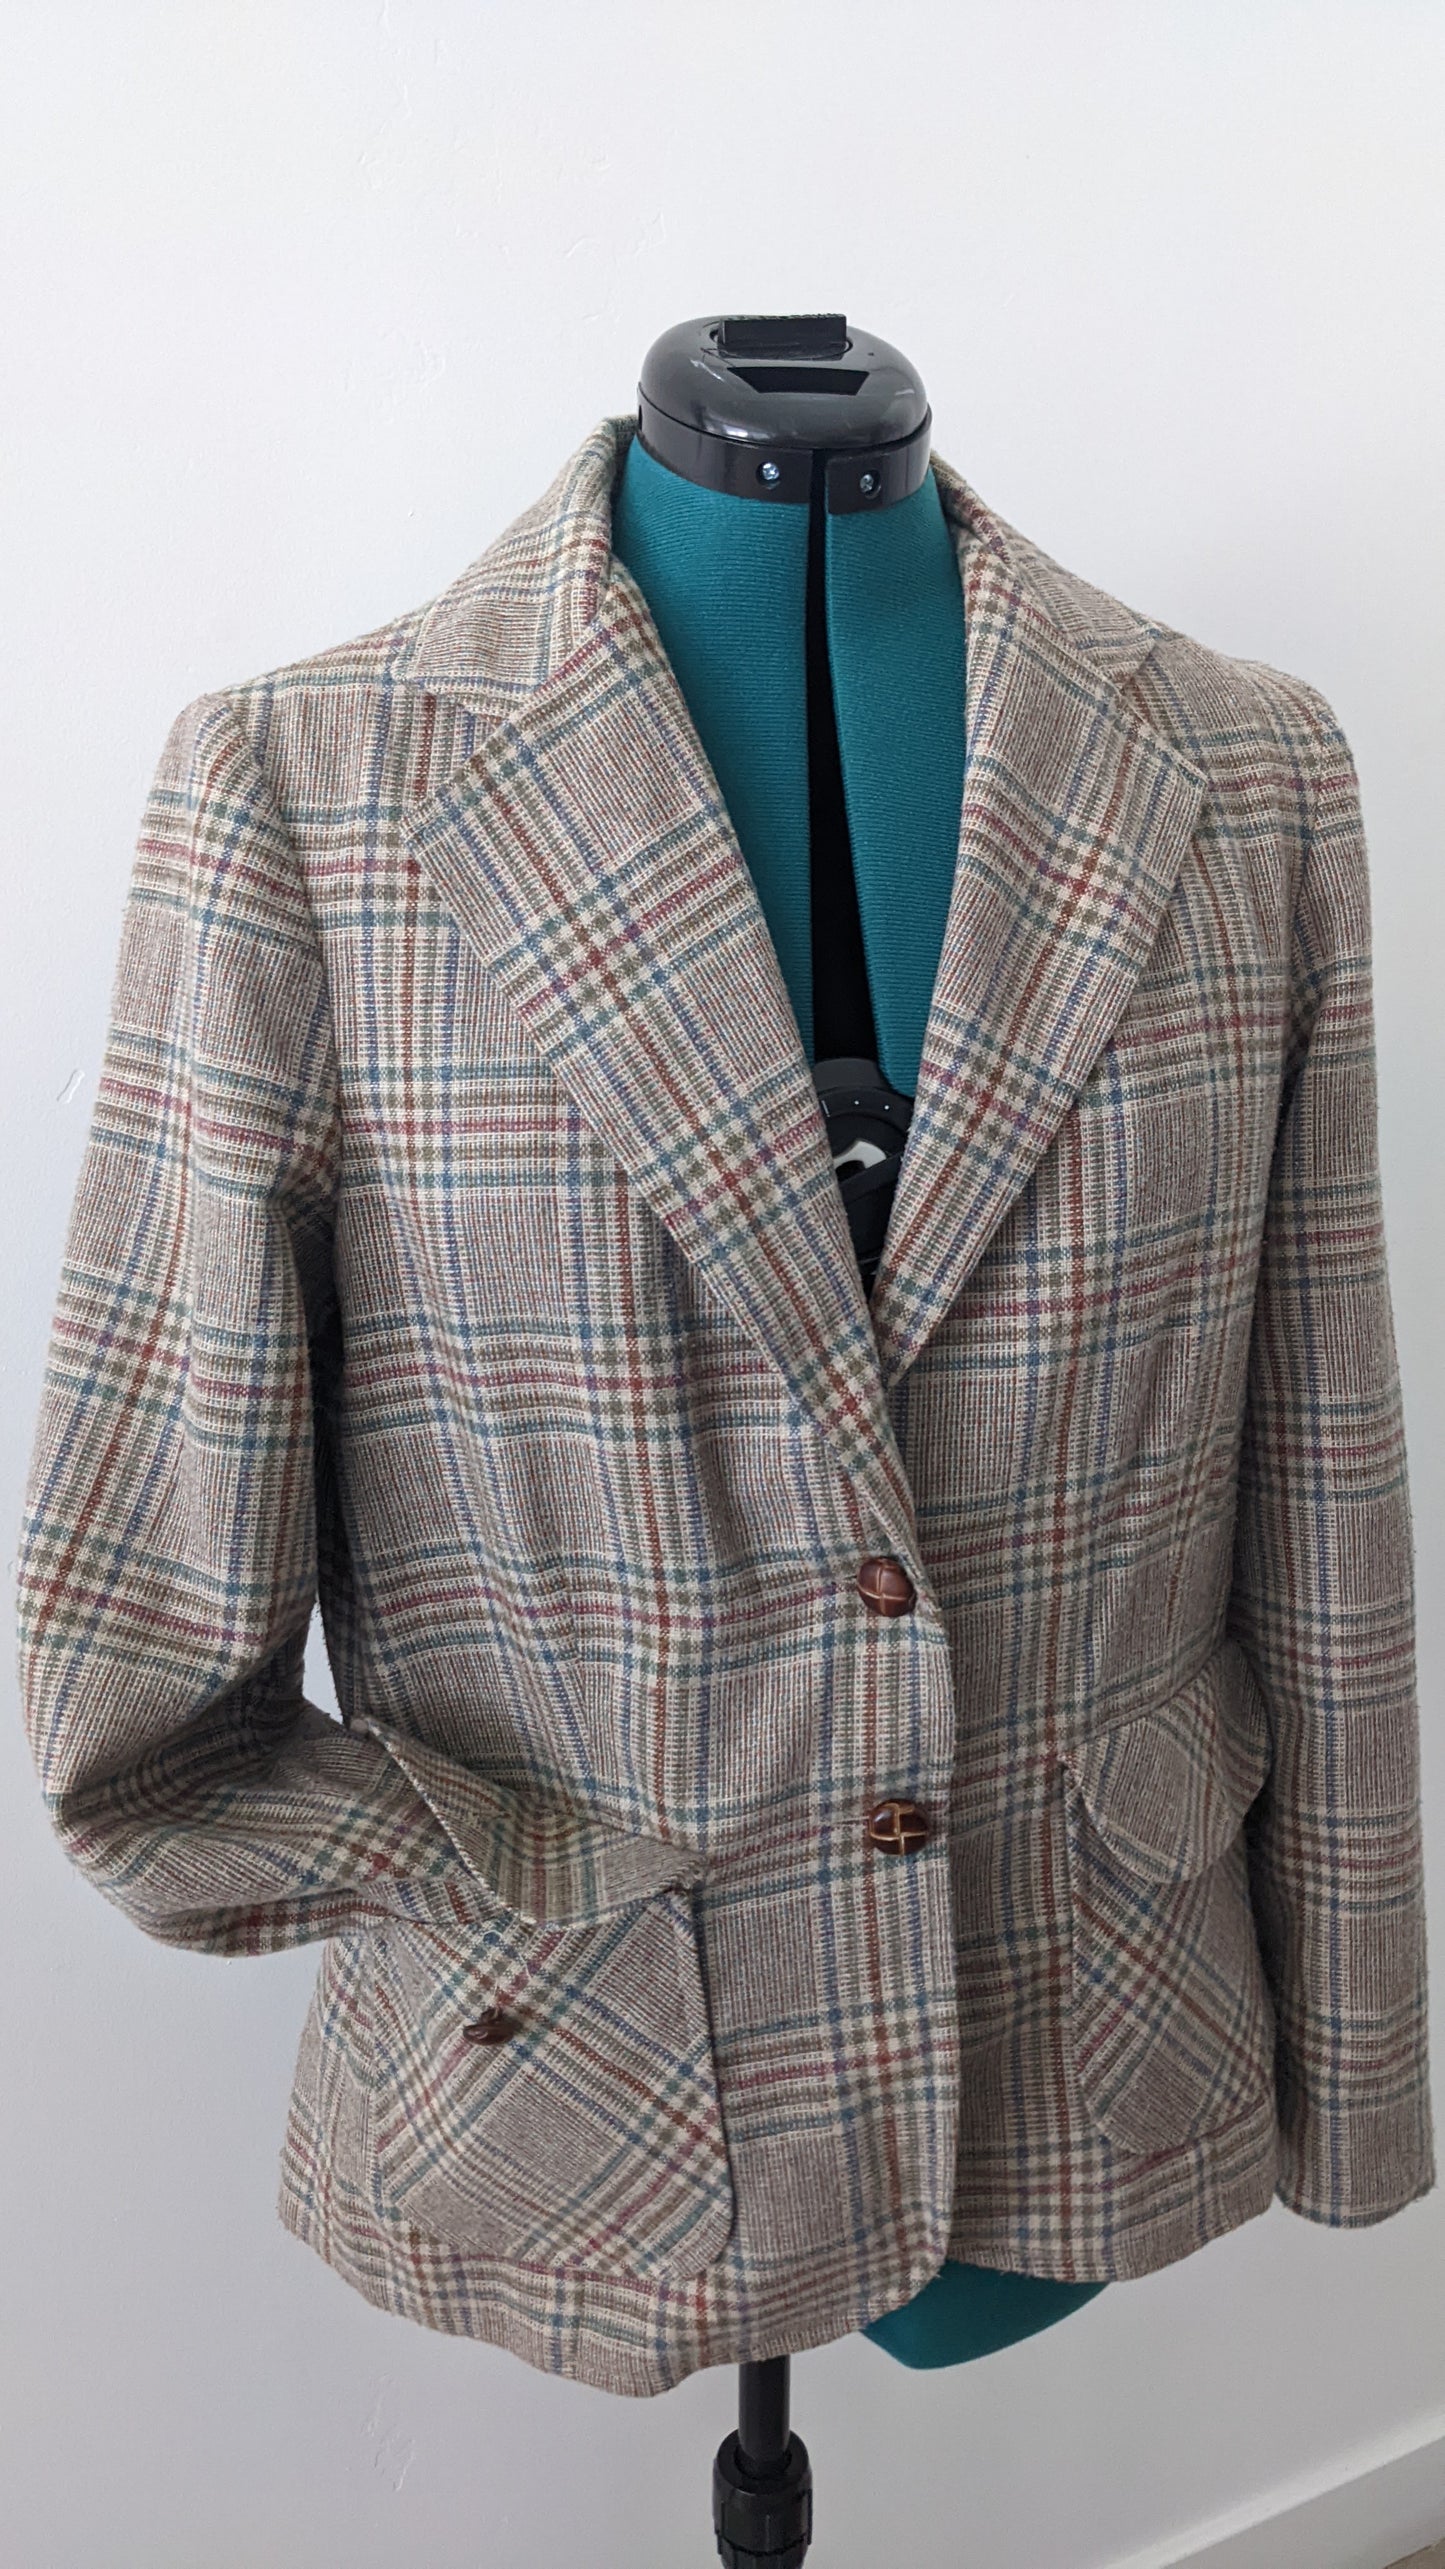 Union made Blazer with wool trousers and layering